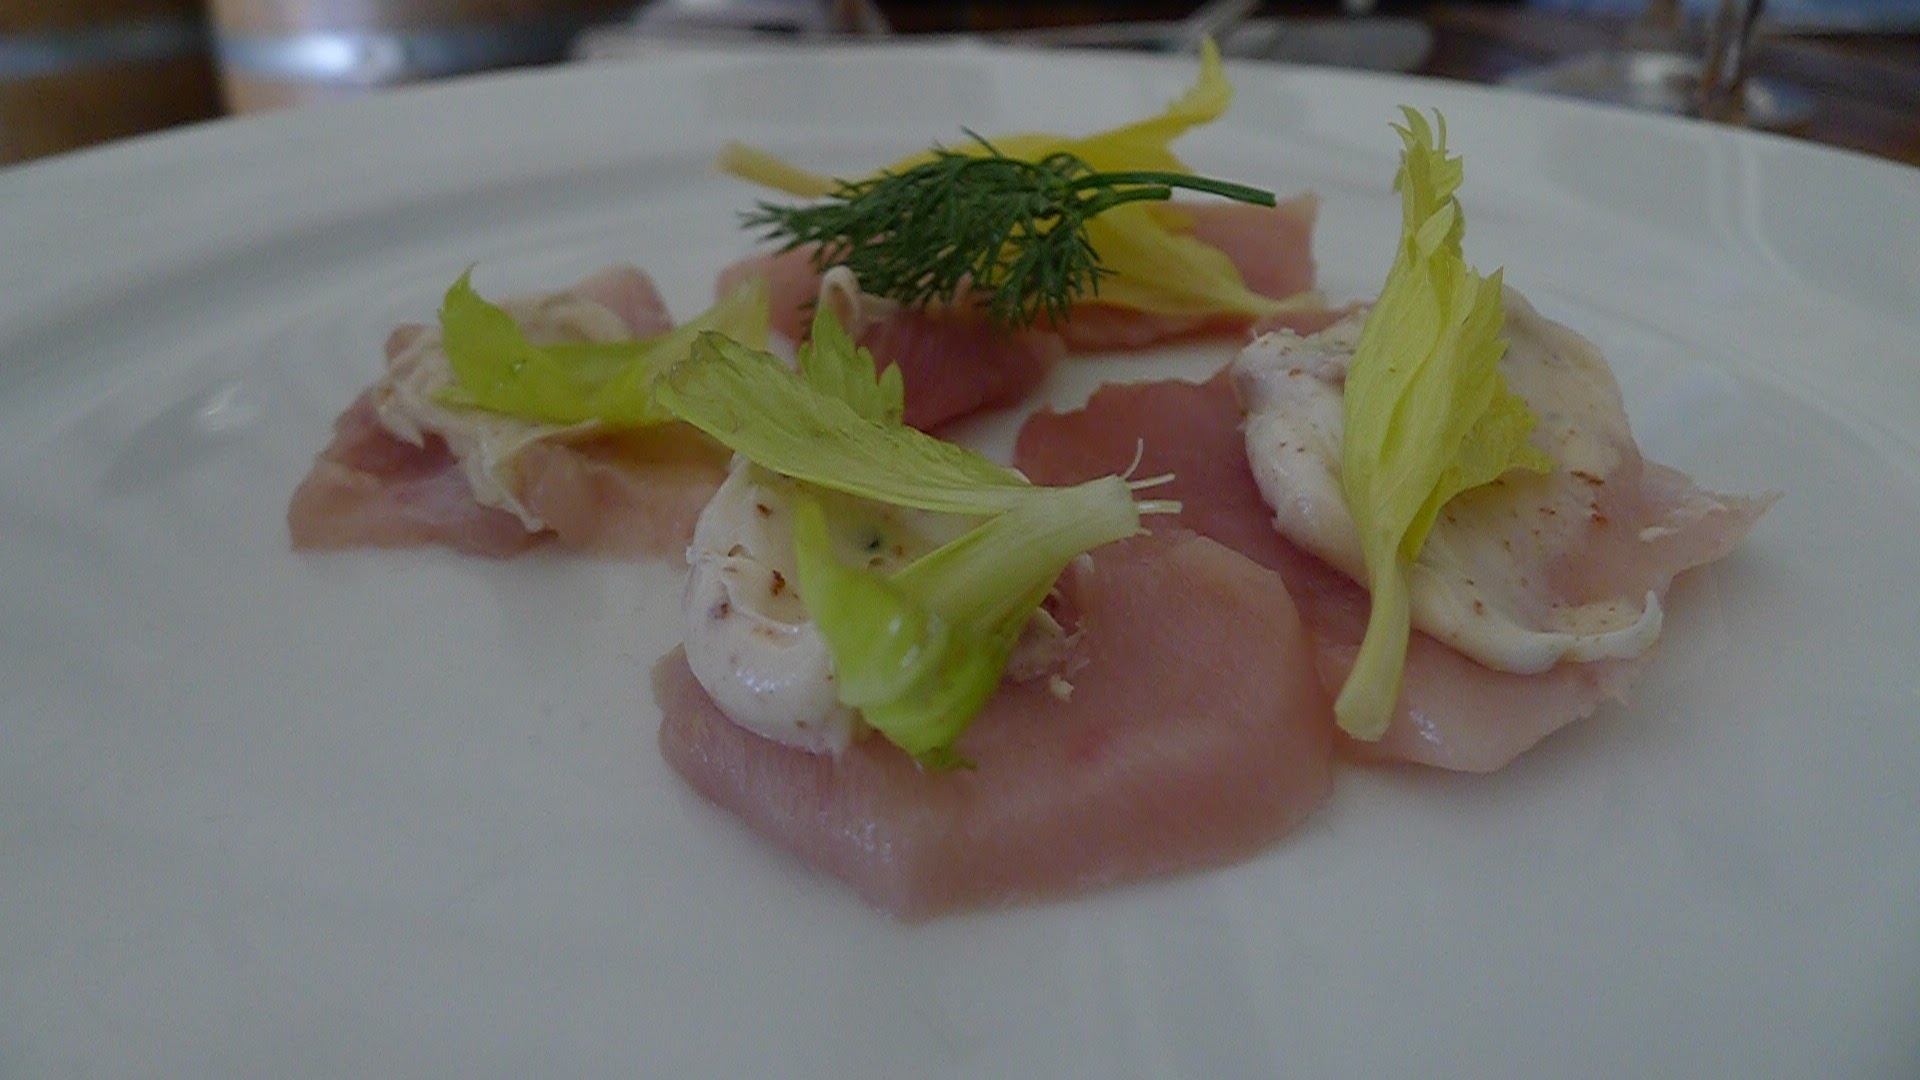 B.C. Albacore Tuna with Whipped Bacon Fat and Celery Foliage.